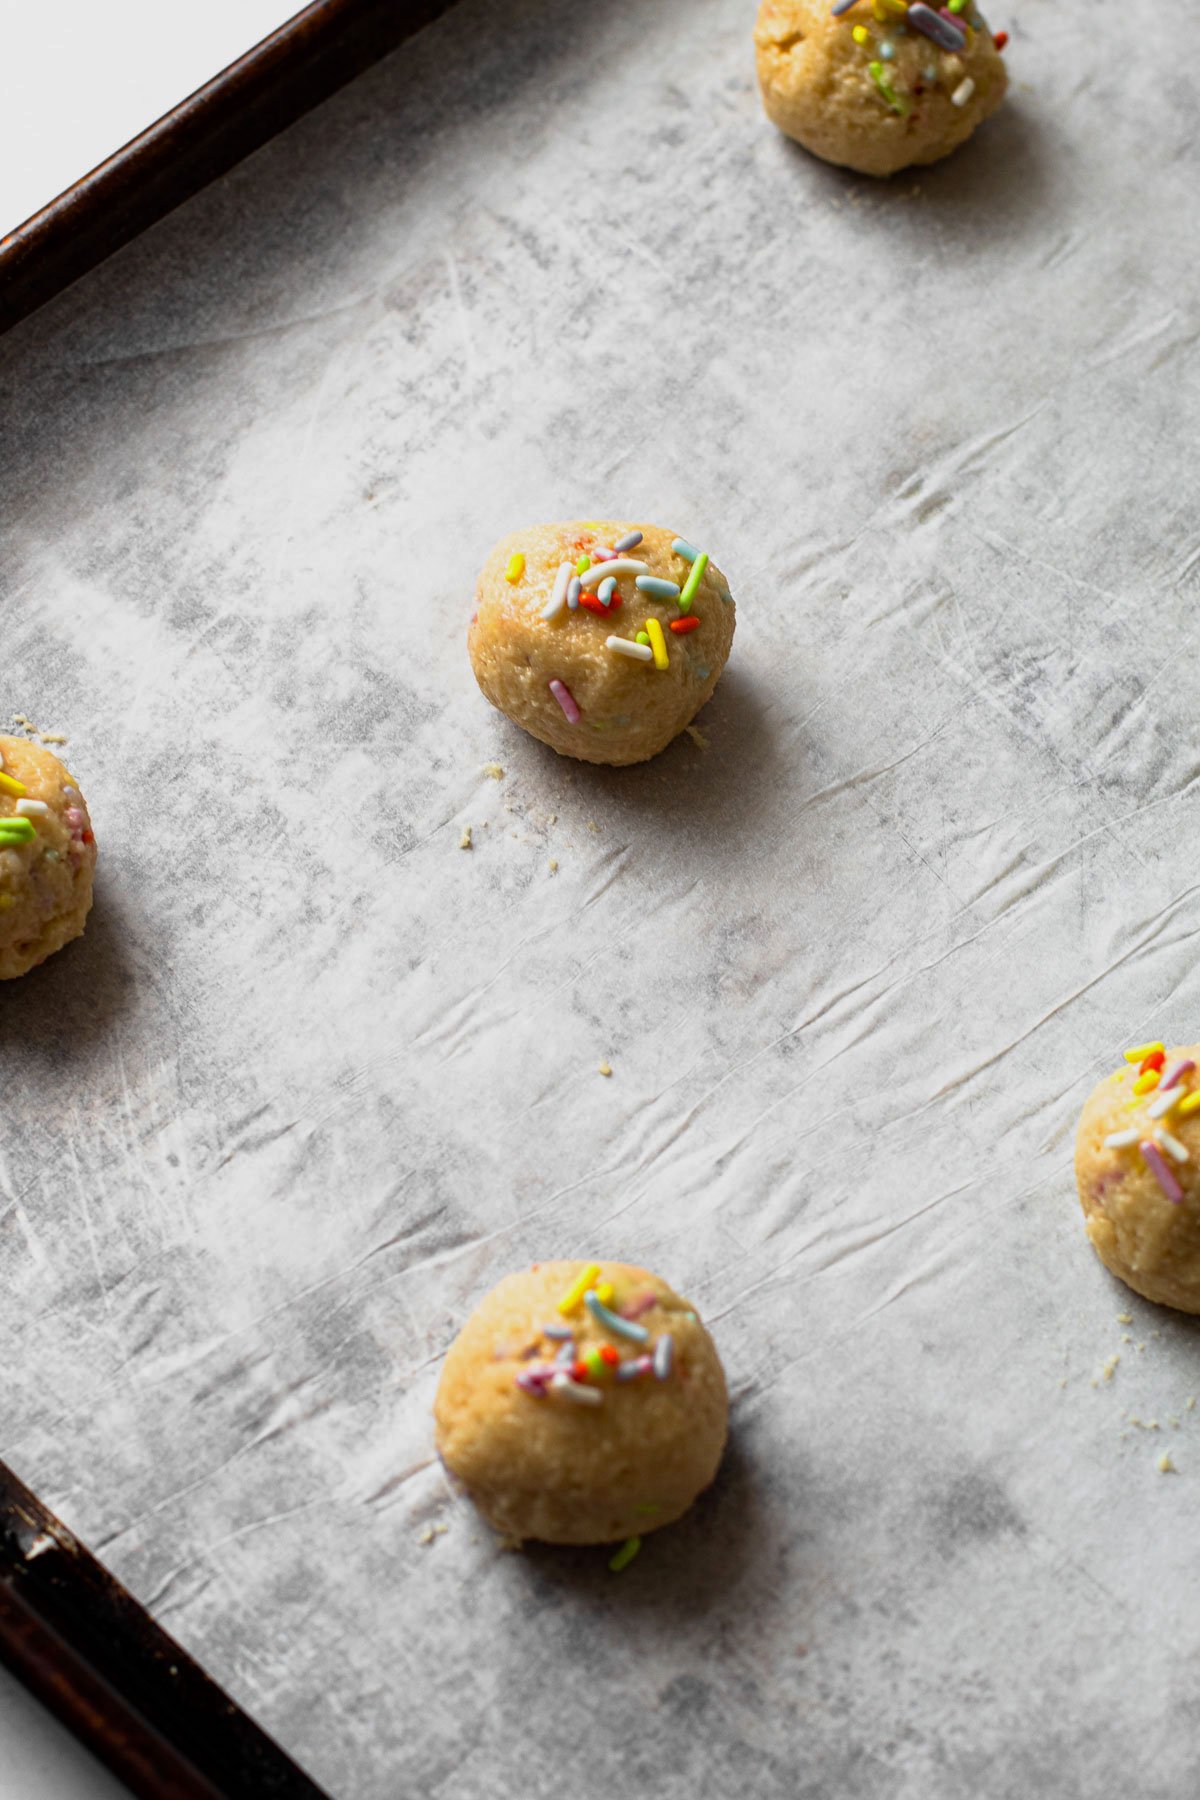 Funfetti cookie dough balls unbaked on a sheet tray.